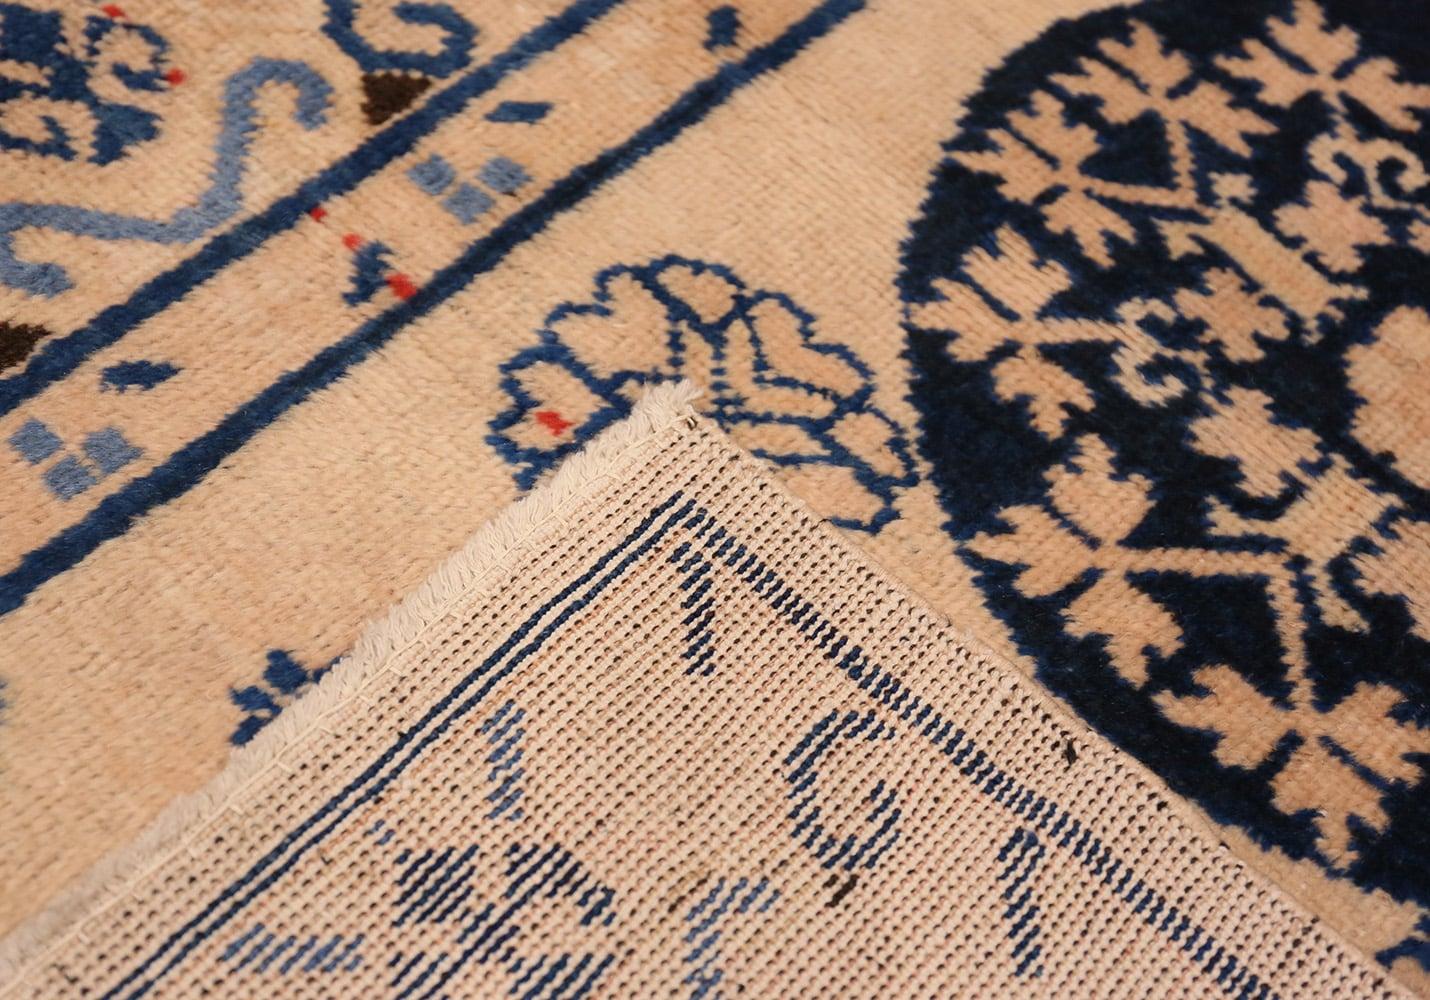 Mid-20th Century Decorative Ivory and Blue Antique Khotan Runner Rug